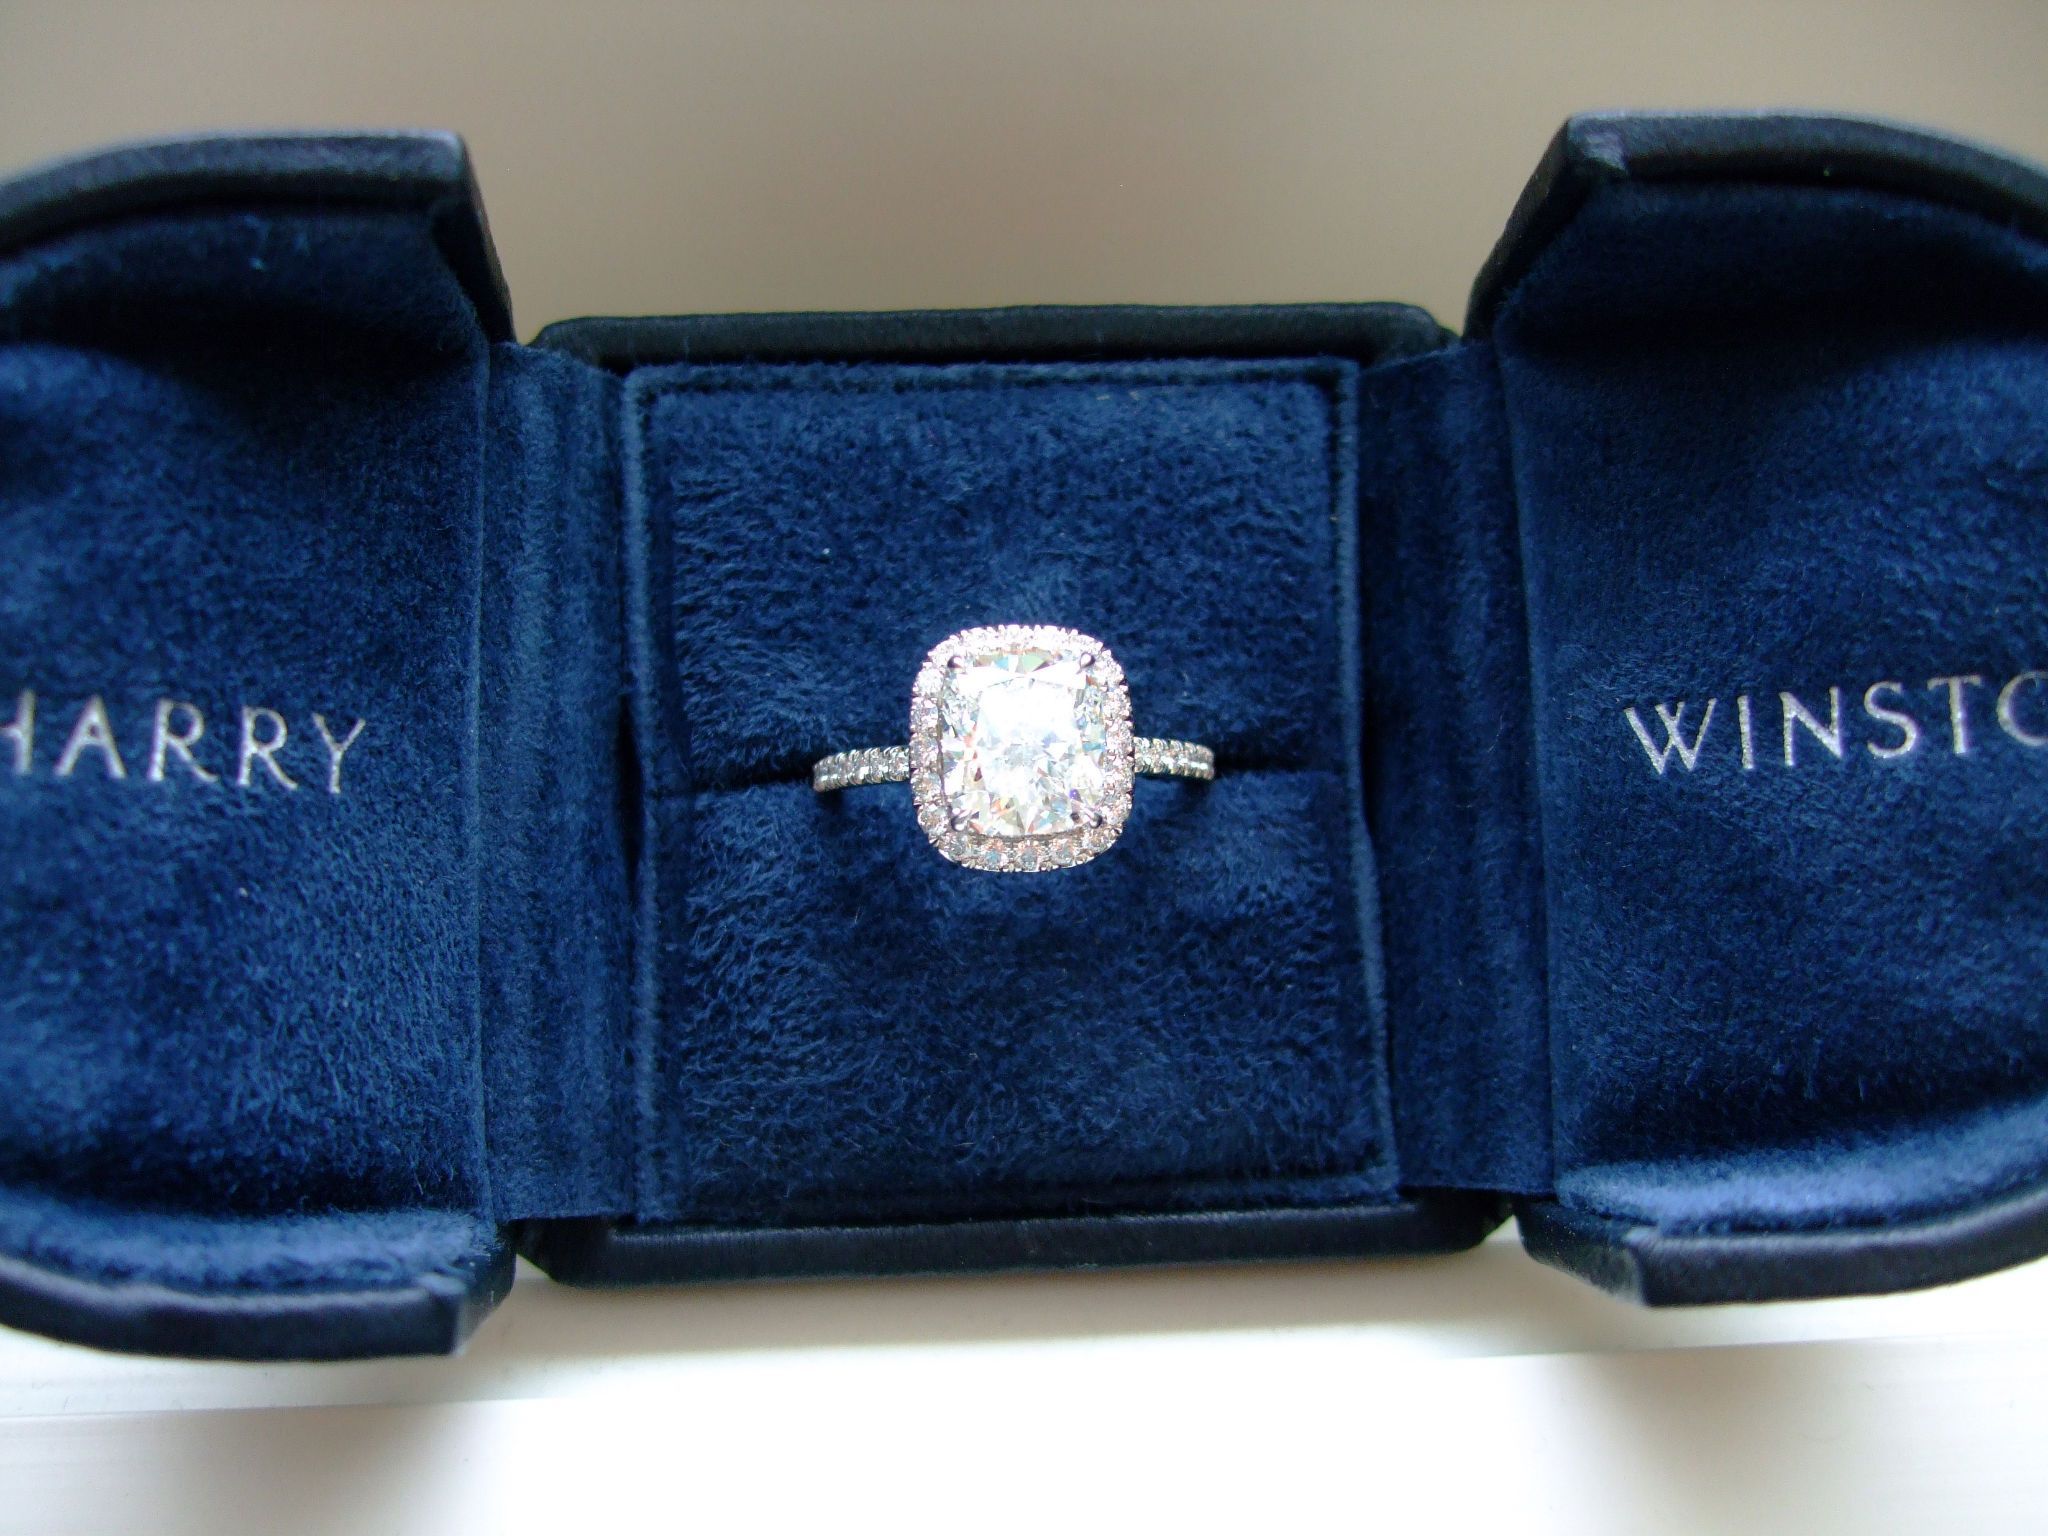 The ultimate engagement ring !!!!!Harry Winston !!!!!!